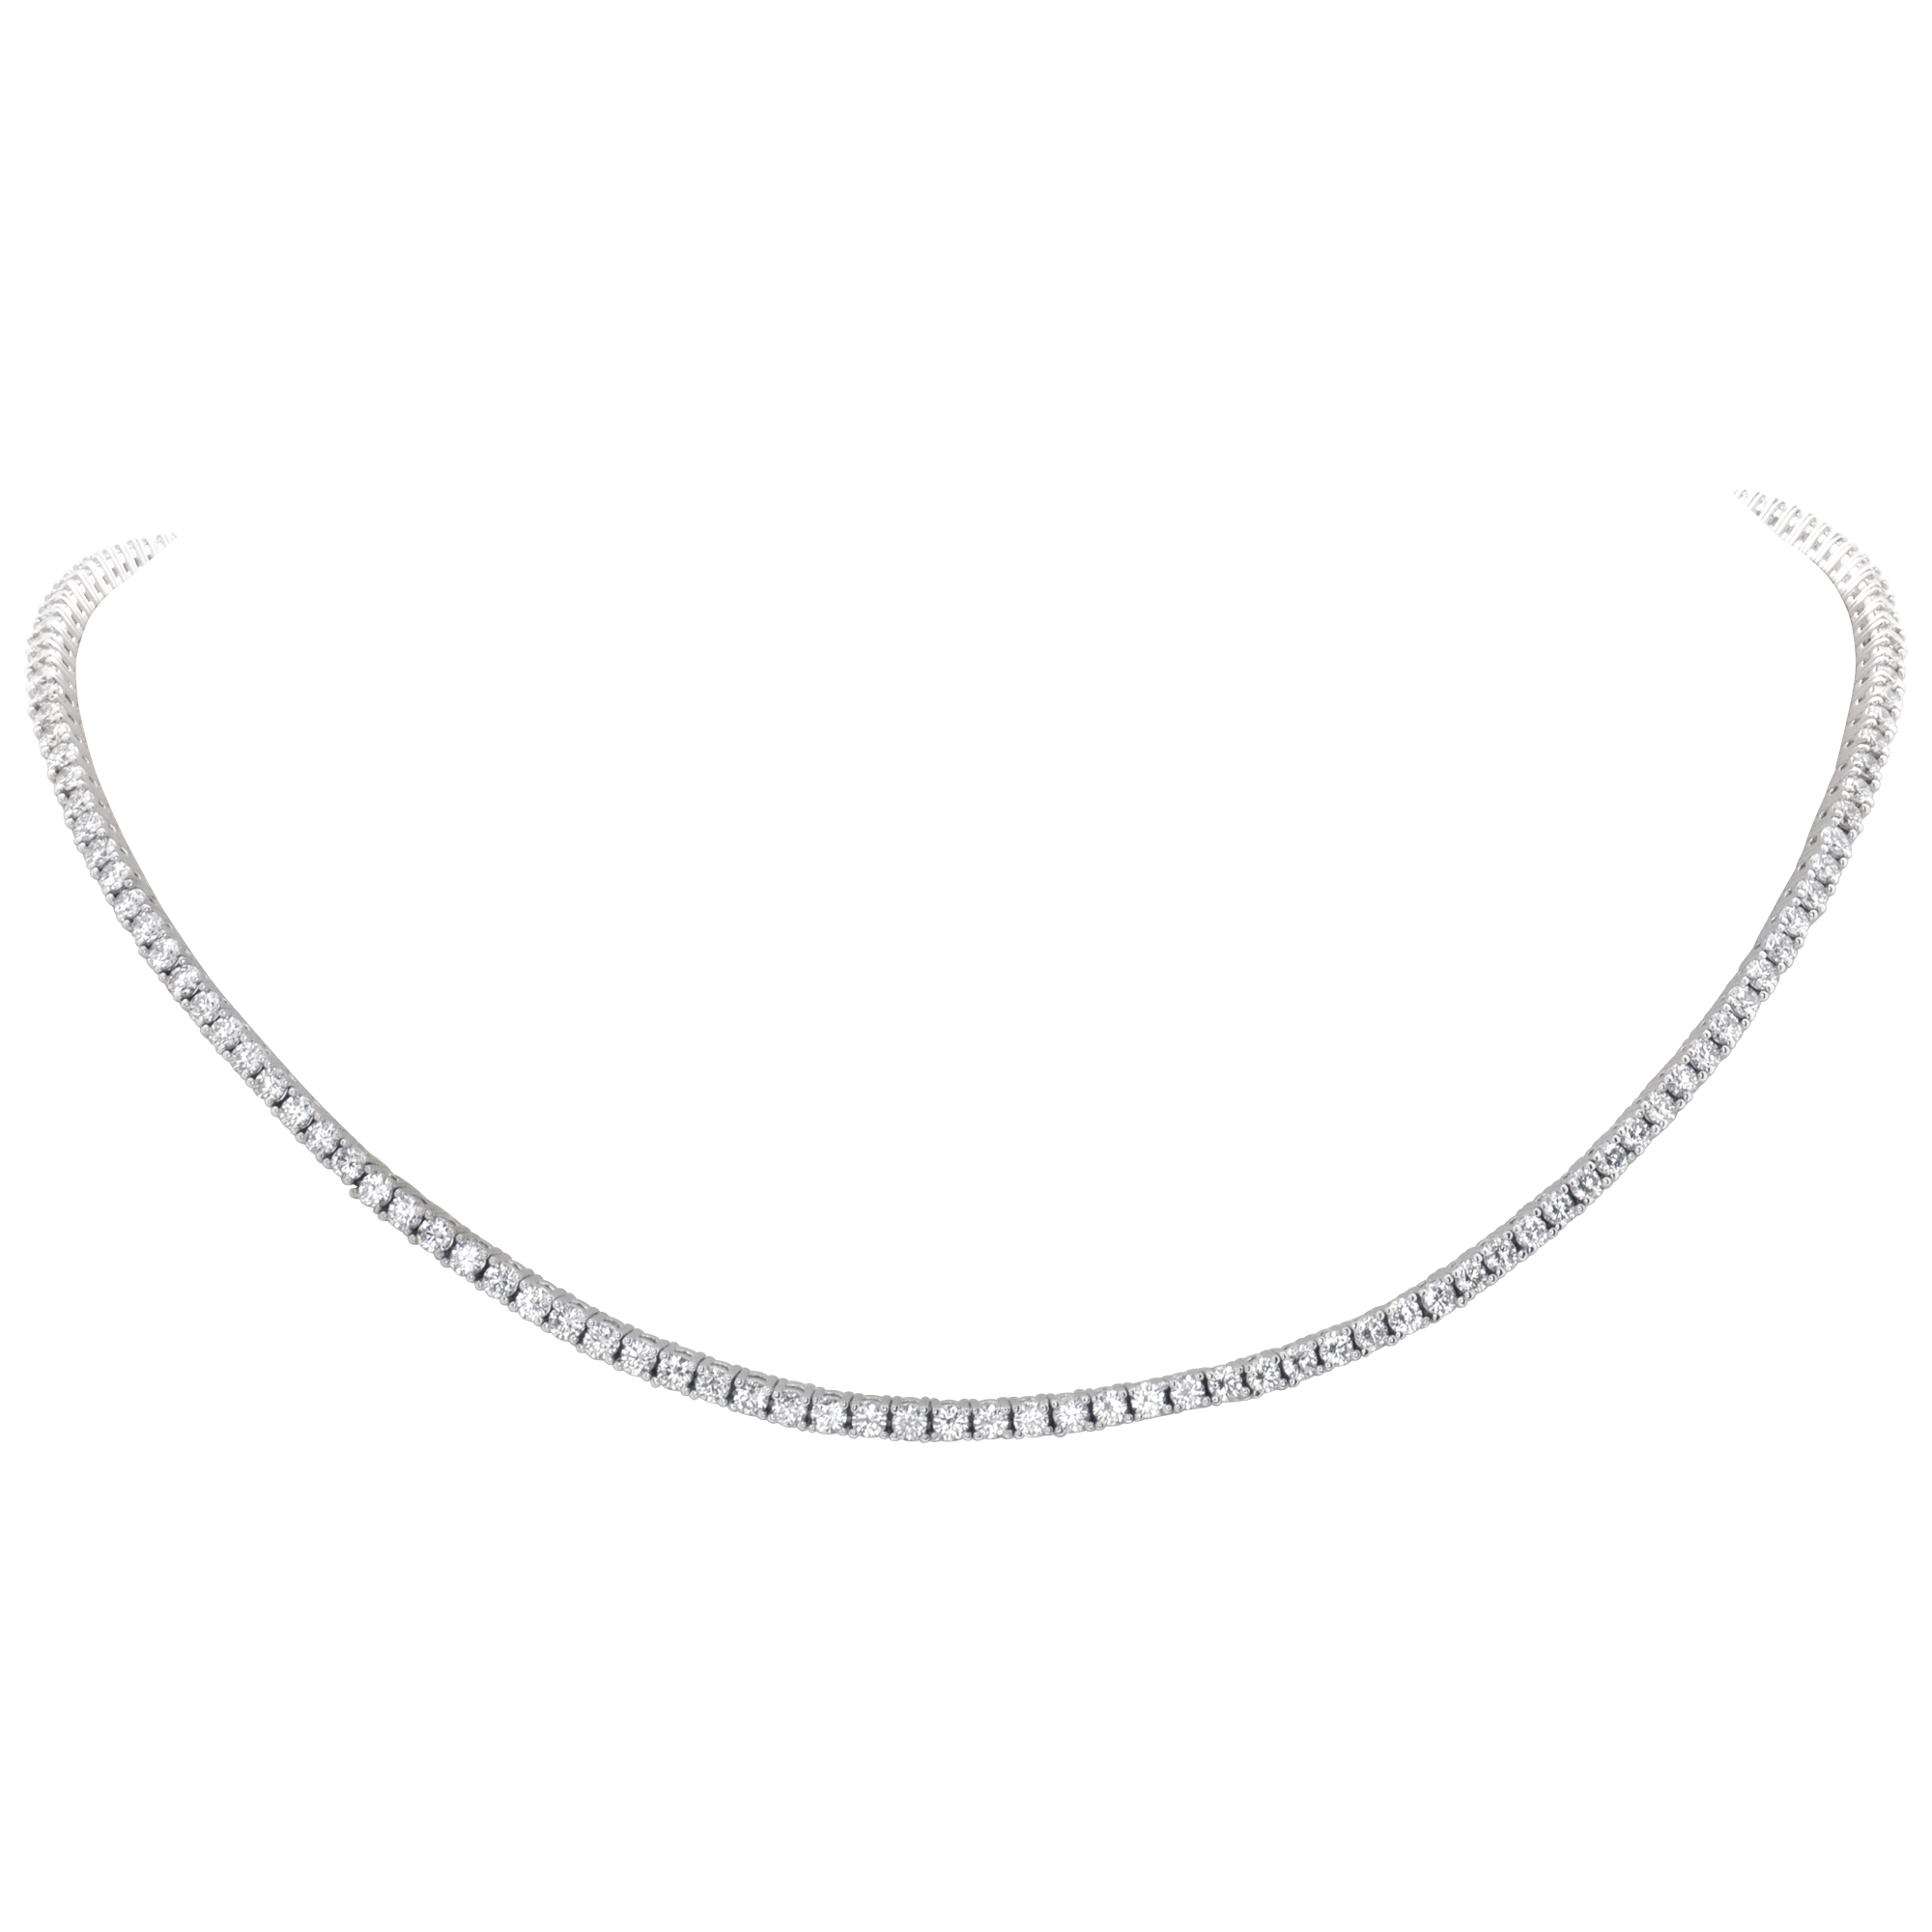 Tennis diamond necklace with 7.82 carats in diamonds image 1